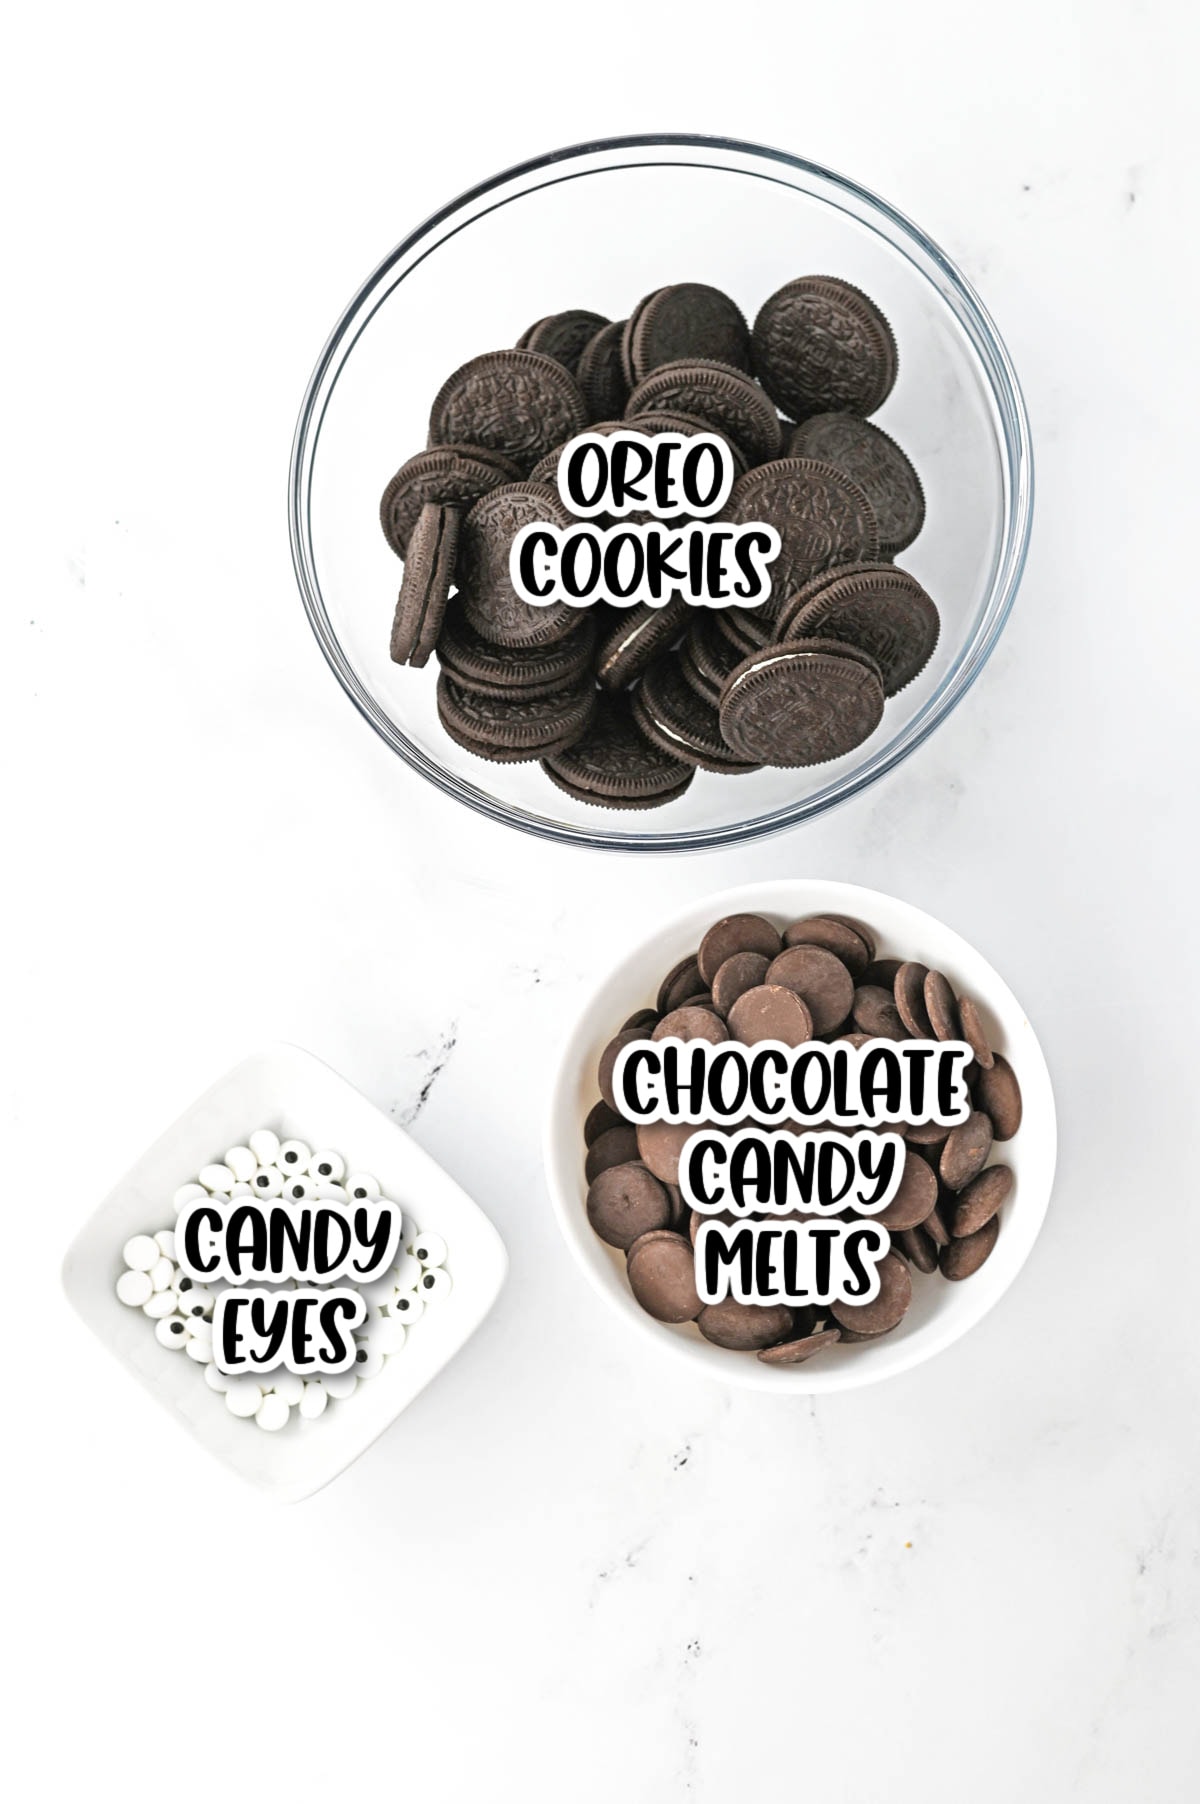 Ingredients for Oreo Bats